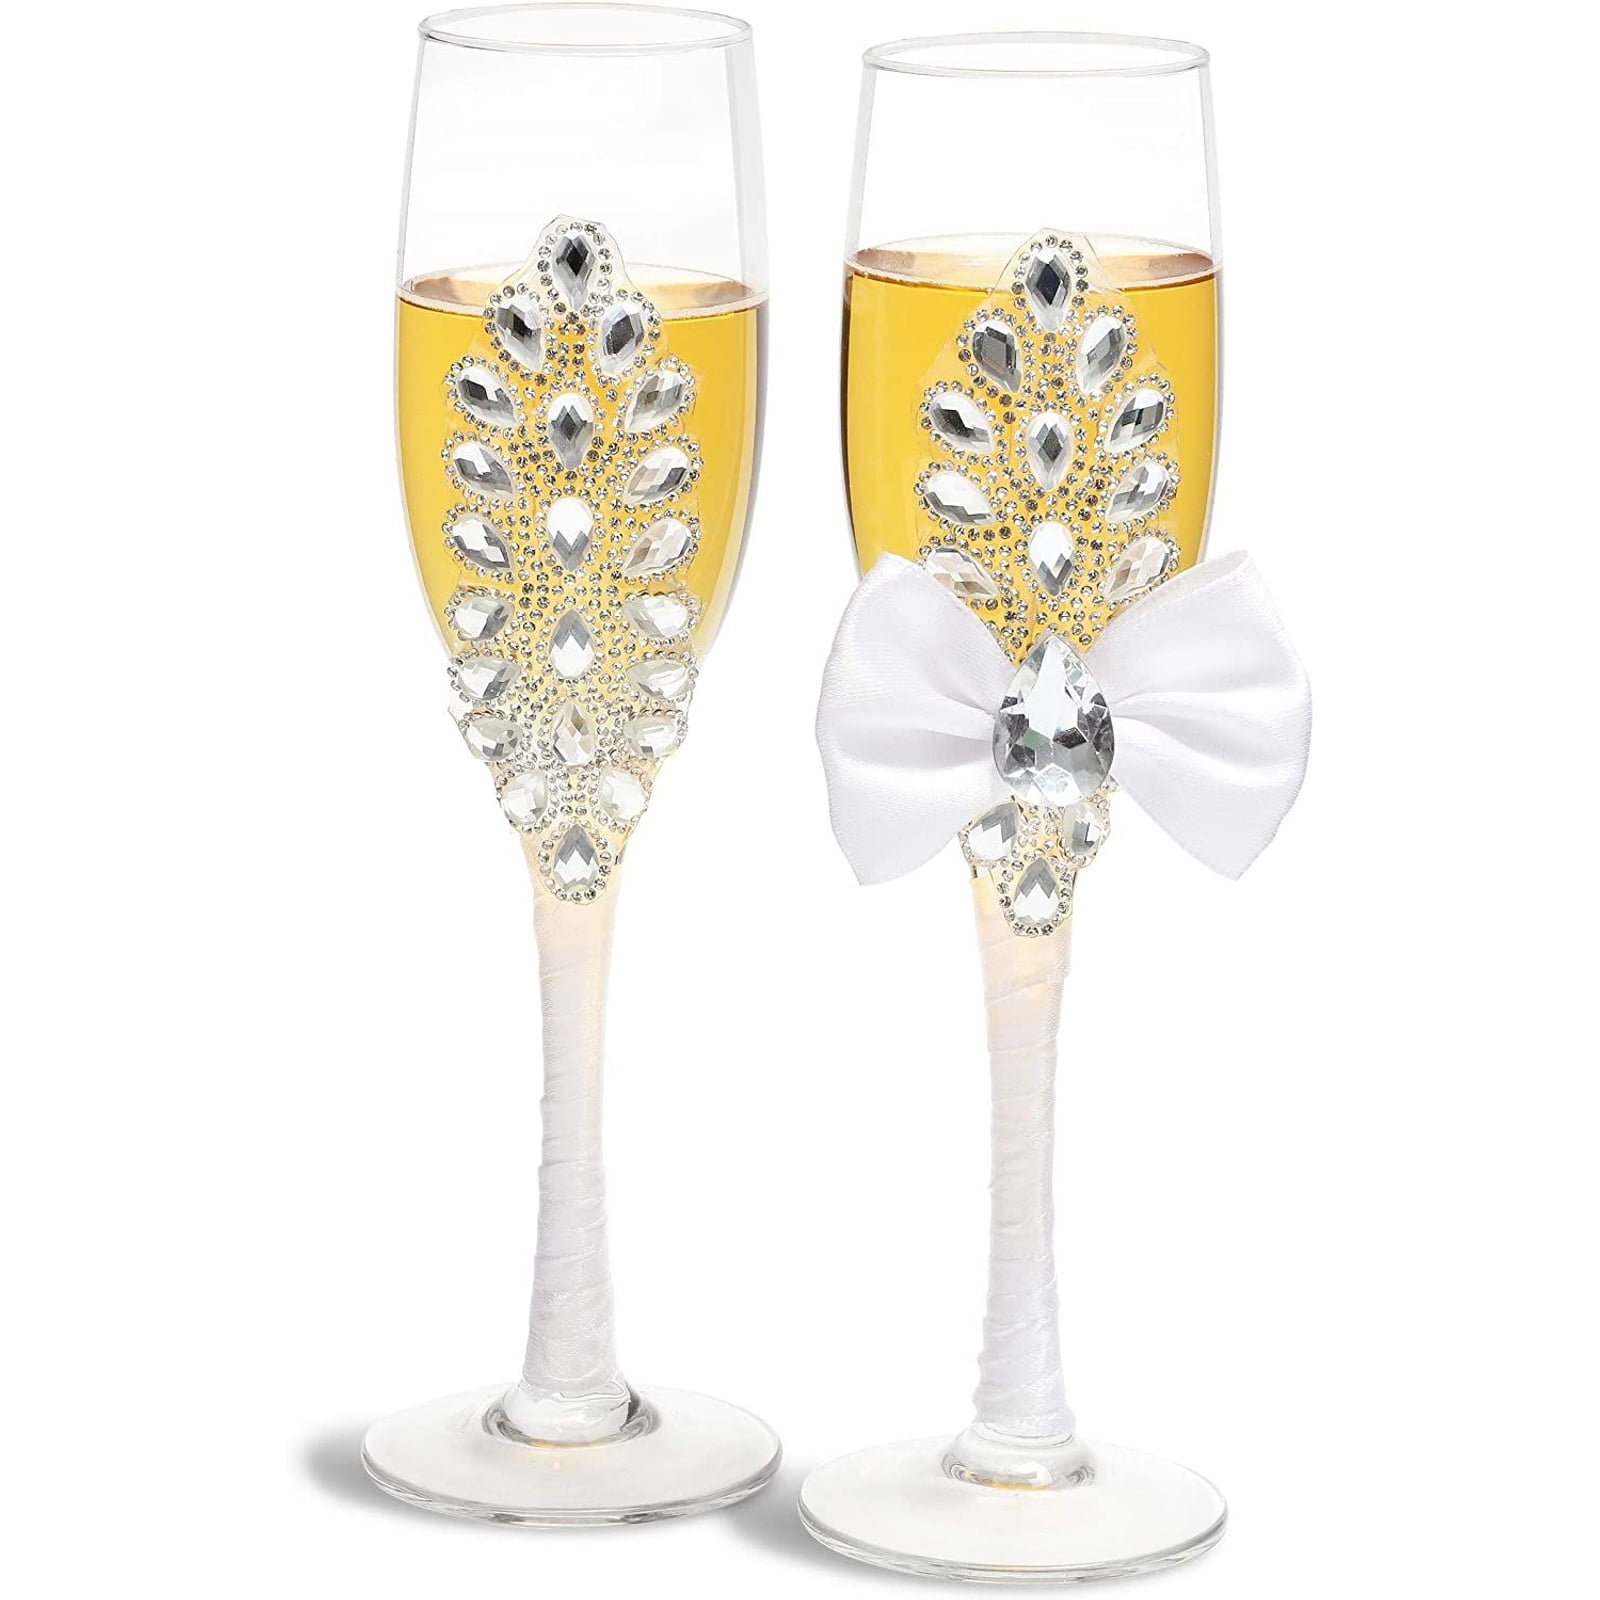 2x Bride Groom Toasting Glasses Cover Wedding Party Goblet Champagne Flute Decor 